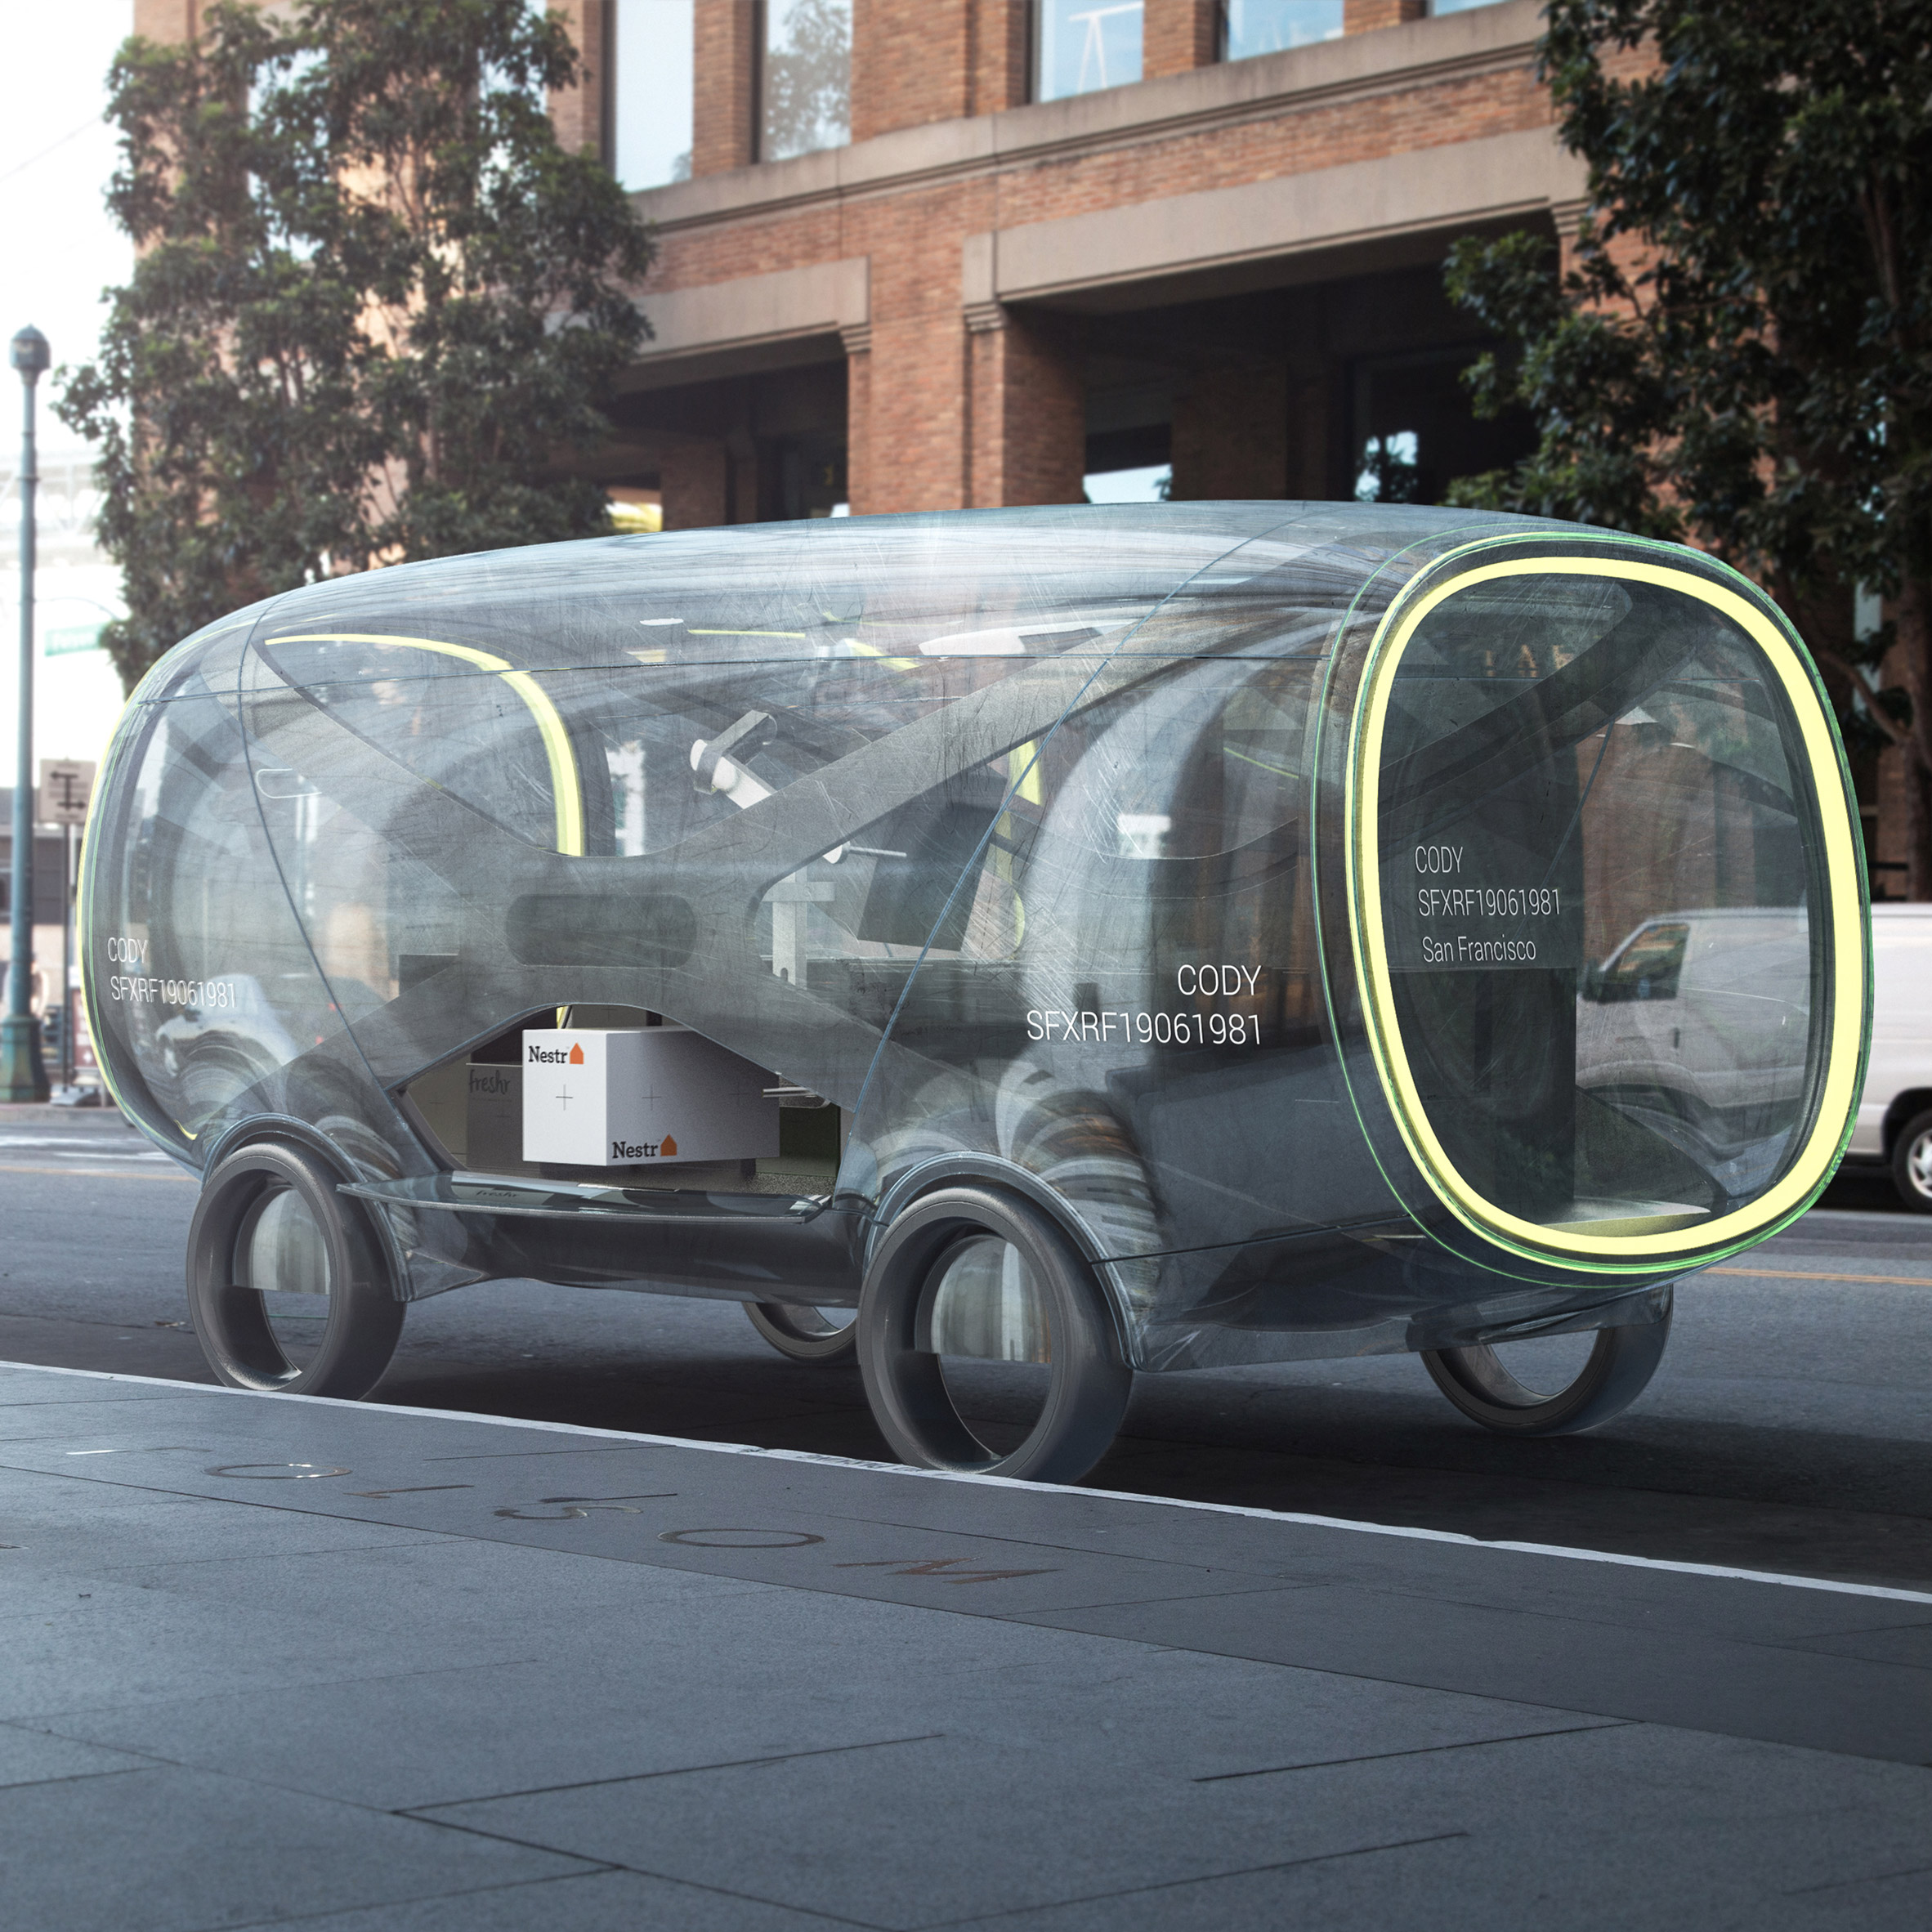 Architecture and design exhibitions guide: The Road Ahead Reimagining Mobility